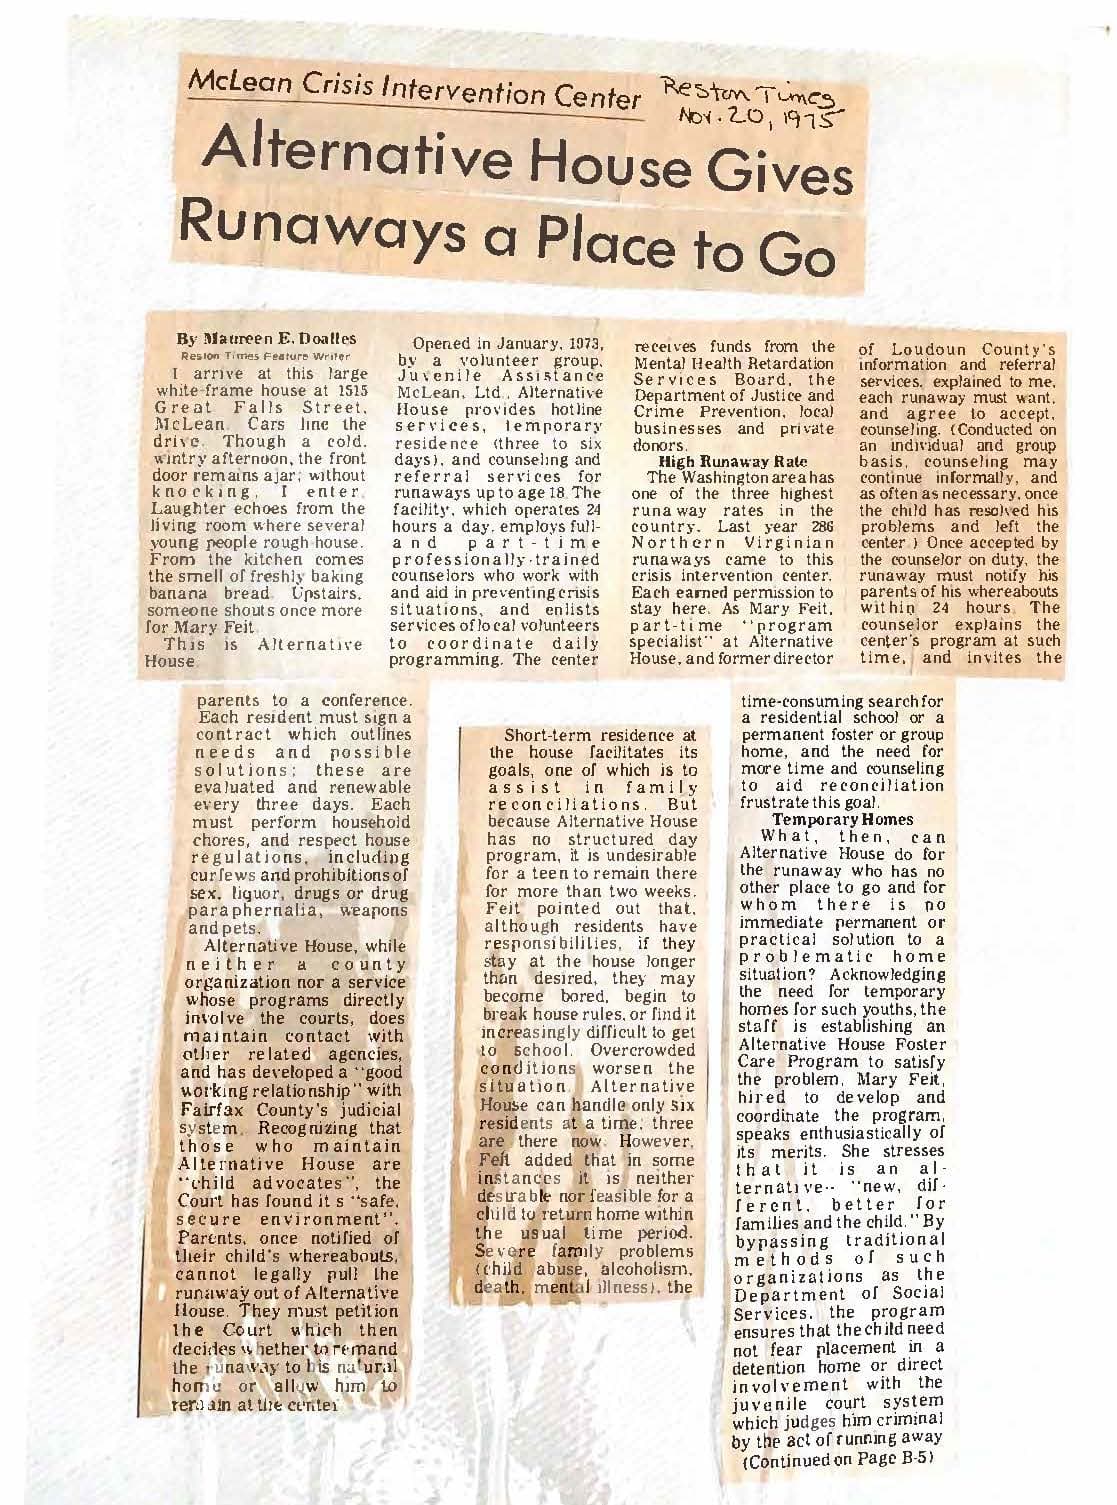 1975 Reston Times Article "AH Gives Runaways a Place to Go"